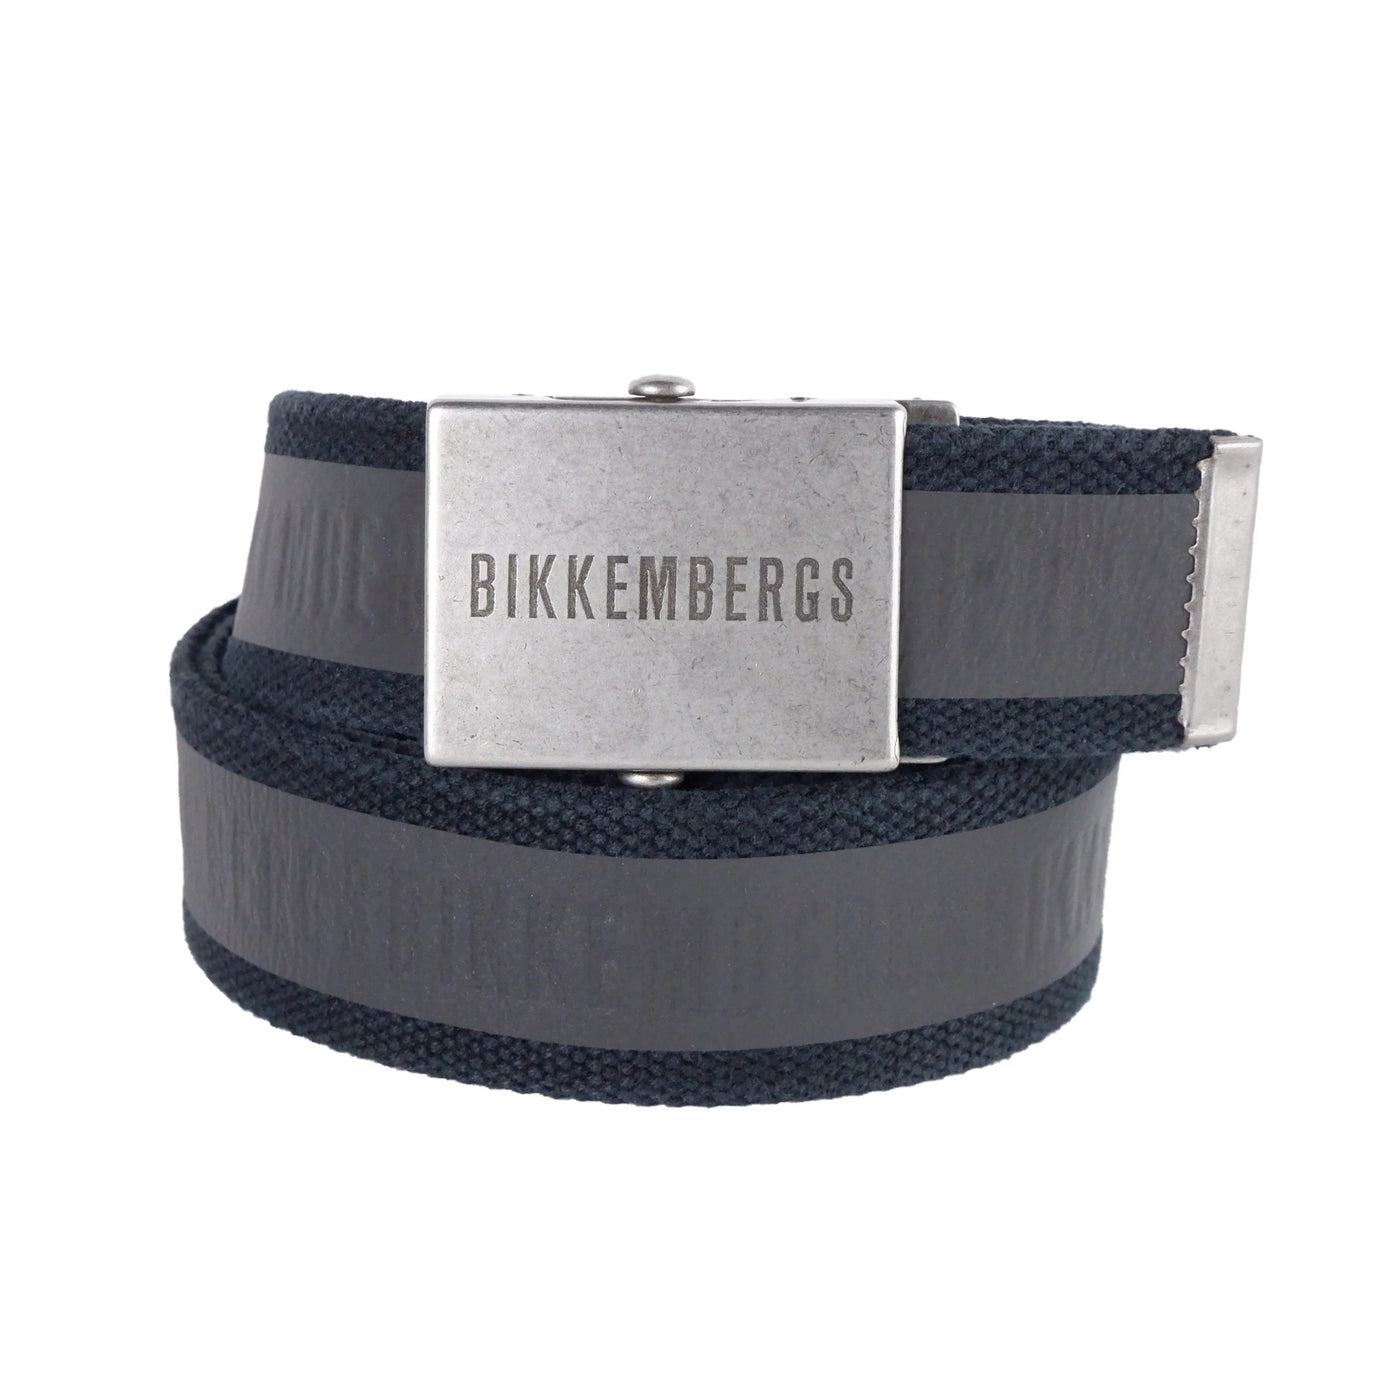 Bikkembergs Logo on buckle  Belts #men, 100 cm / 40 Inches, 105 cm / 42 Inches, 110 cm / 44 Inches, Belts - Men - Accessories, Bikkembergs, Black, feed-agegroup-adult, feed-color-black, feed-gender-male, feed-size- 40 Inches, feed-size- 42 Inches, feed-size- 44 Inches, Gender_Men at SEYMAYKA